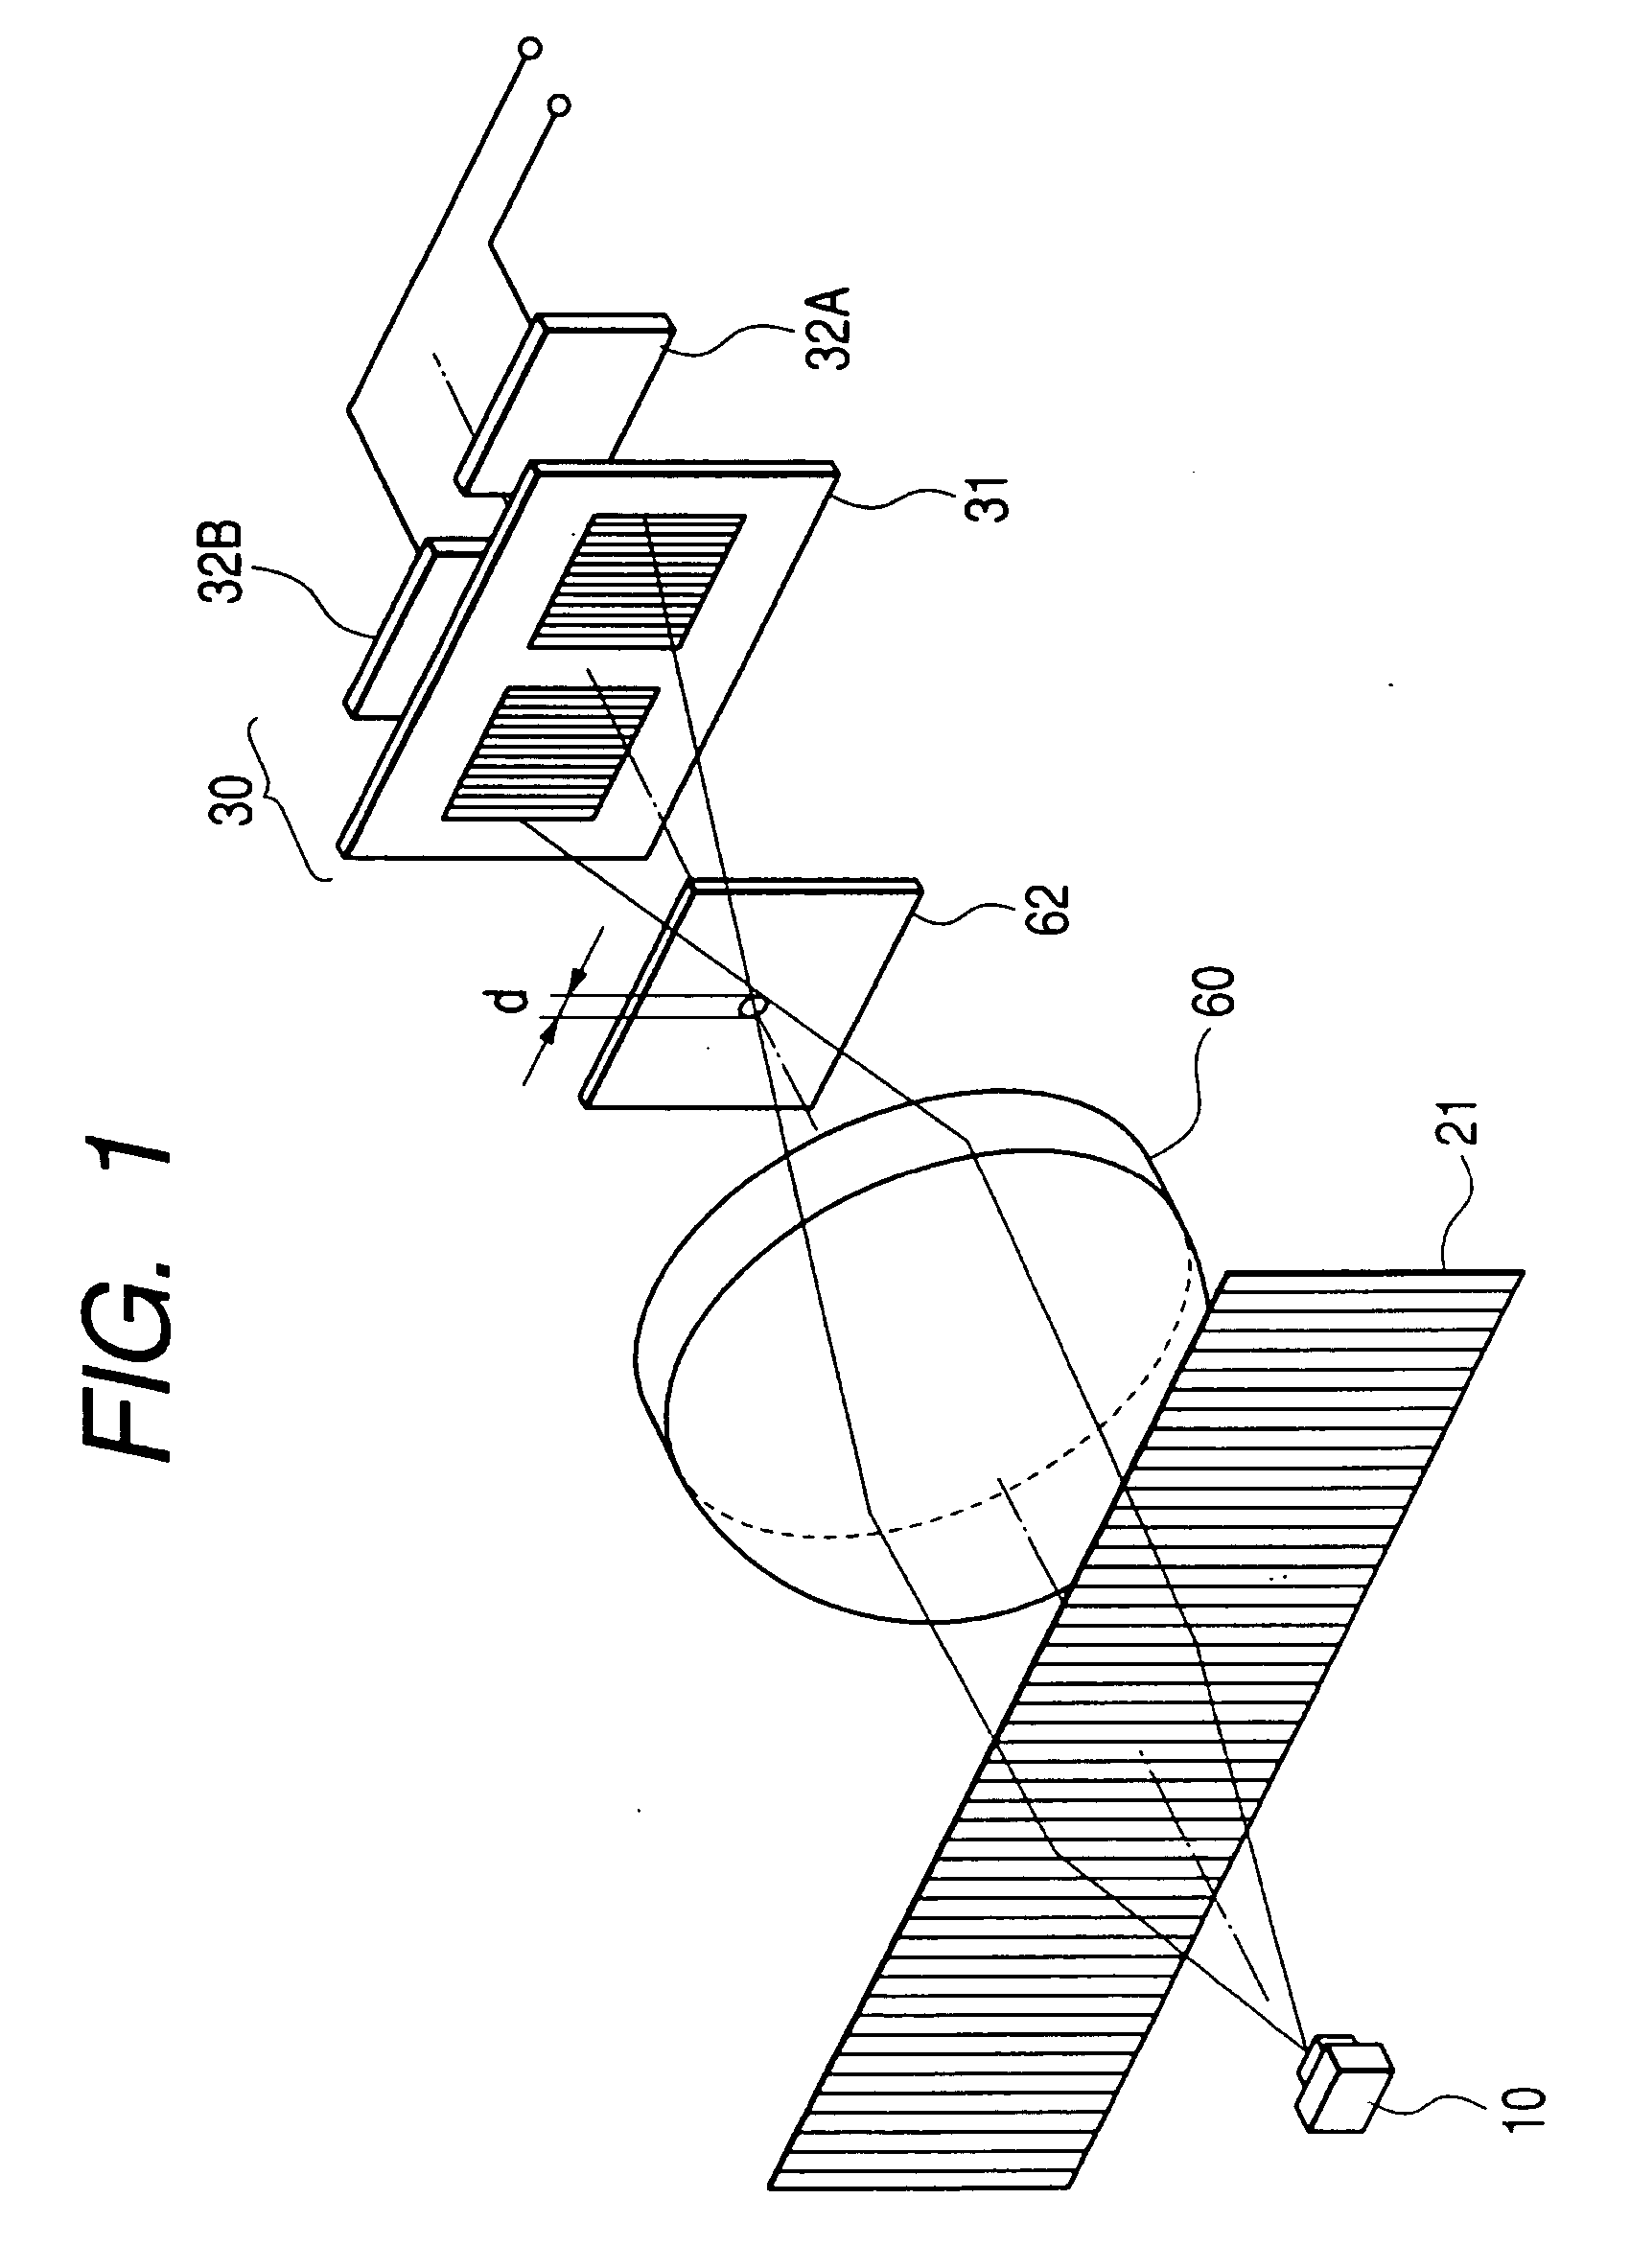 Optical configuration for imaging-type optical encoders